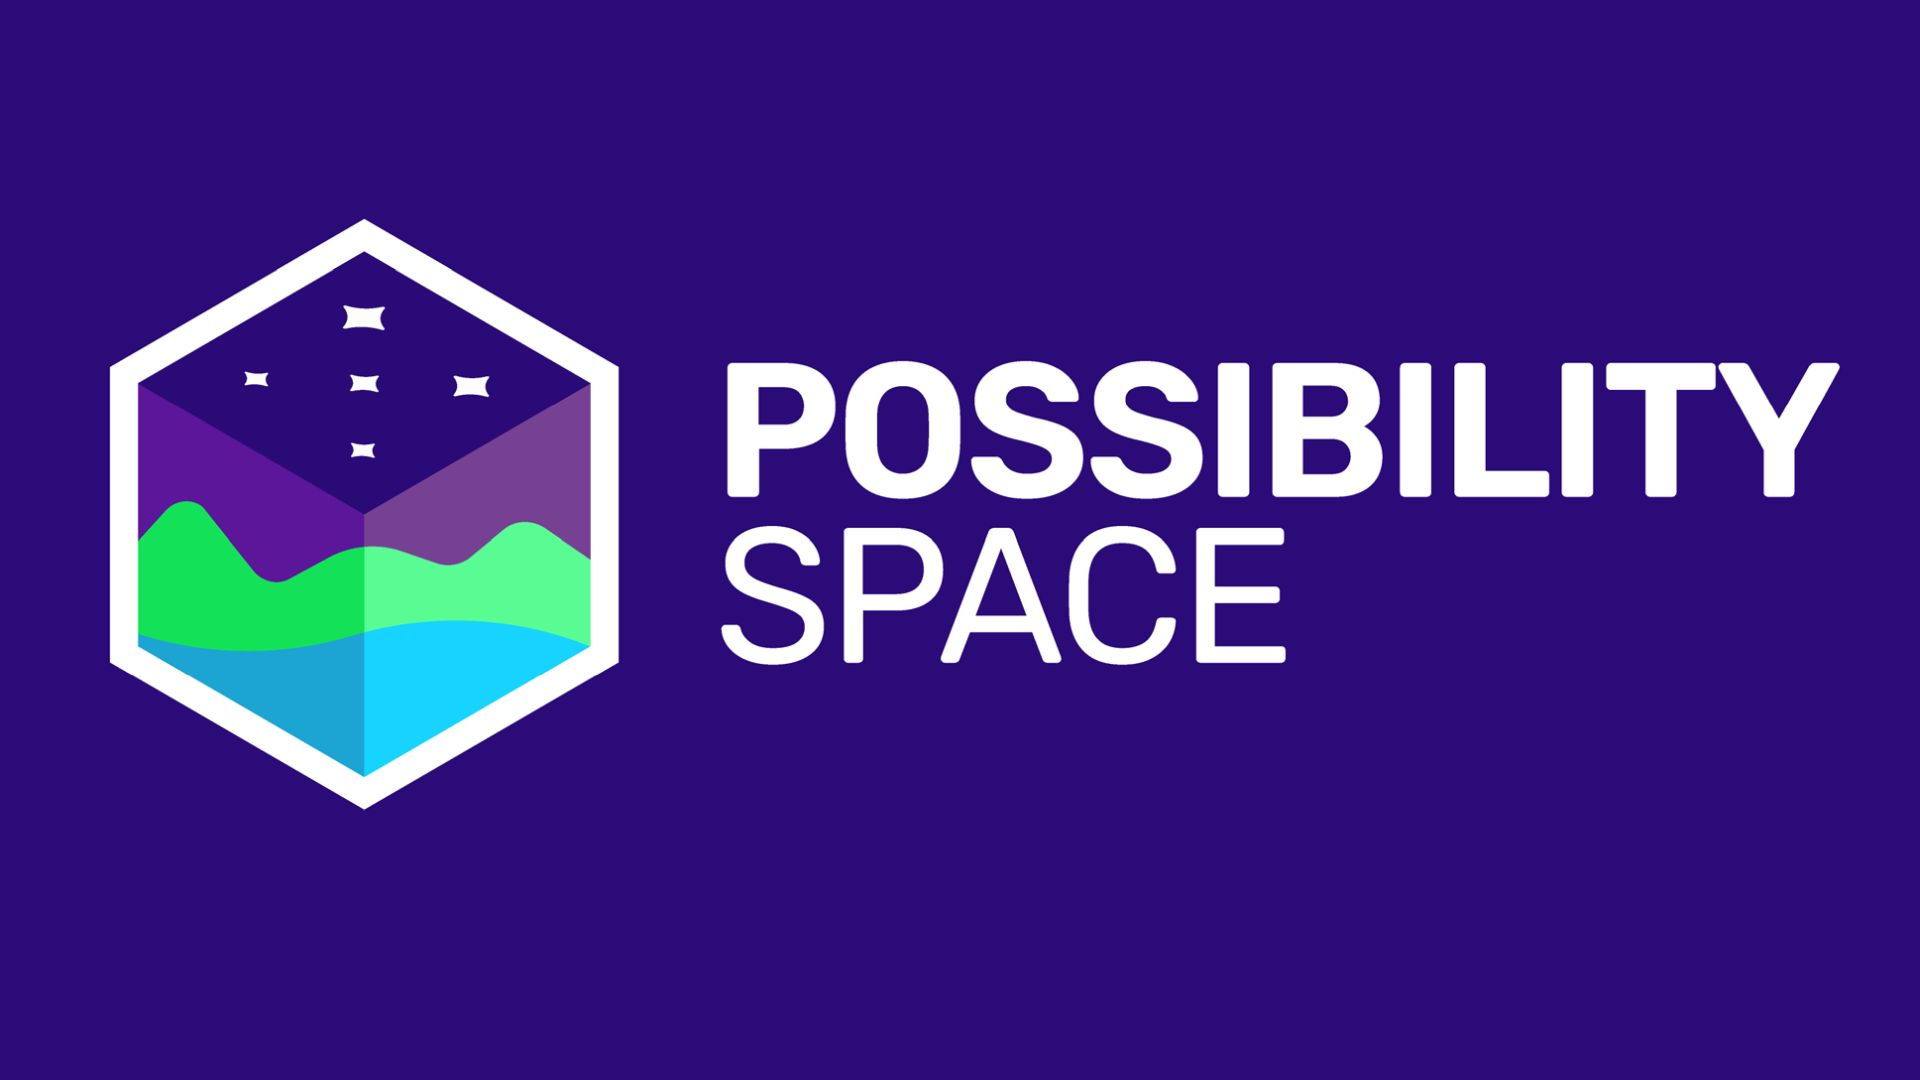 Possibility Space name and logo on a purple background - A purple cube that appears to be a cross-section of water, mountains, sky, and stars.